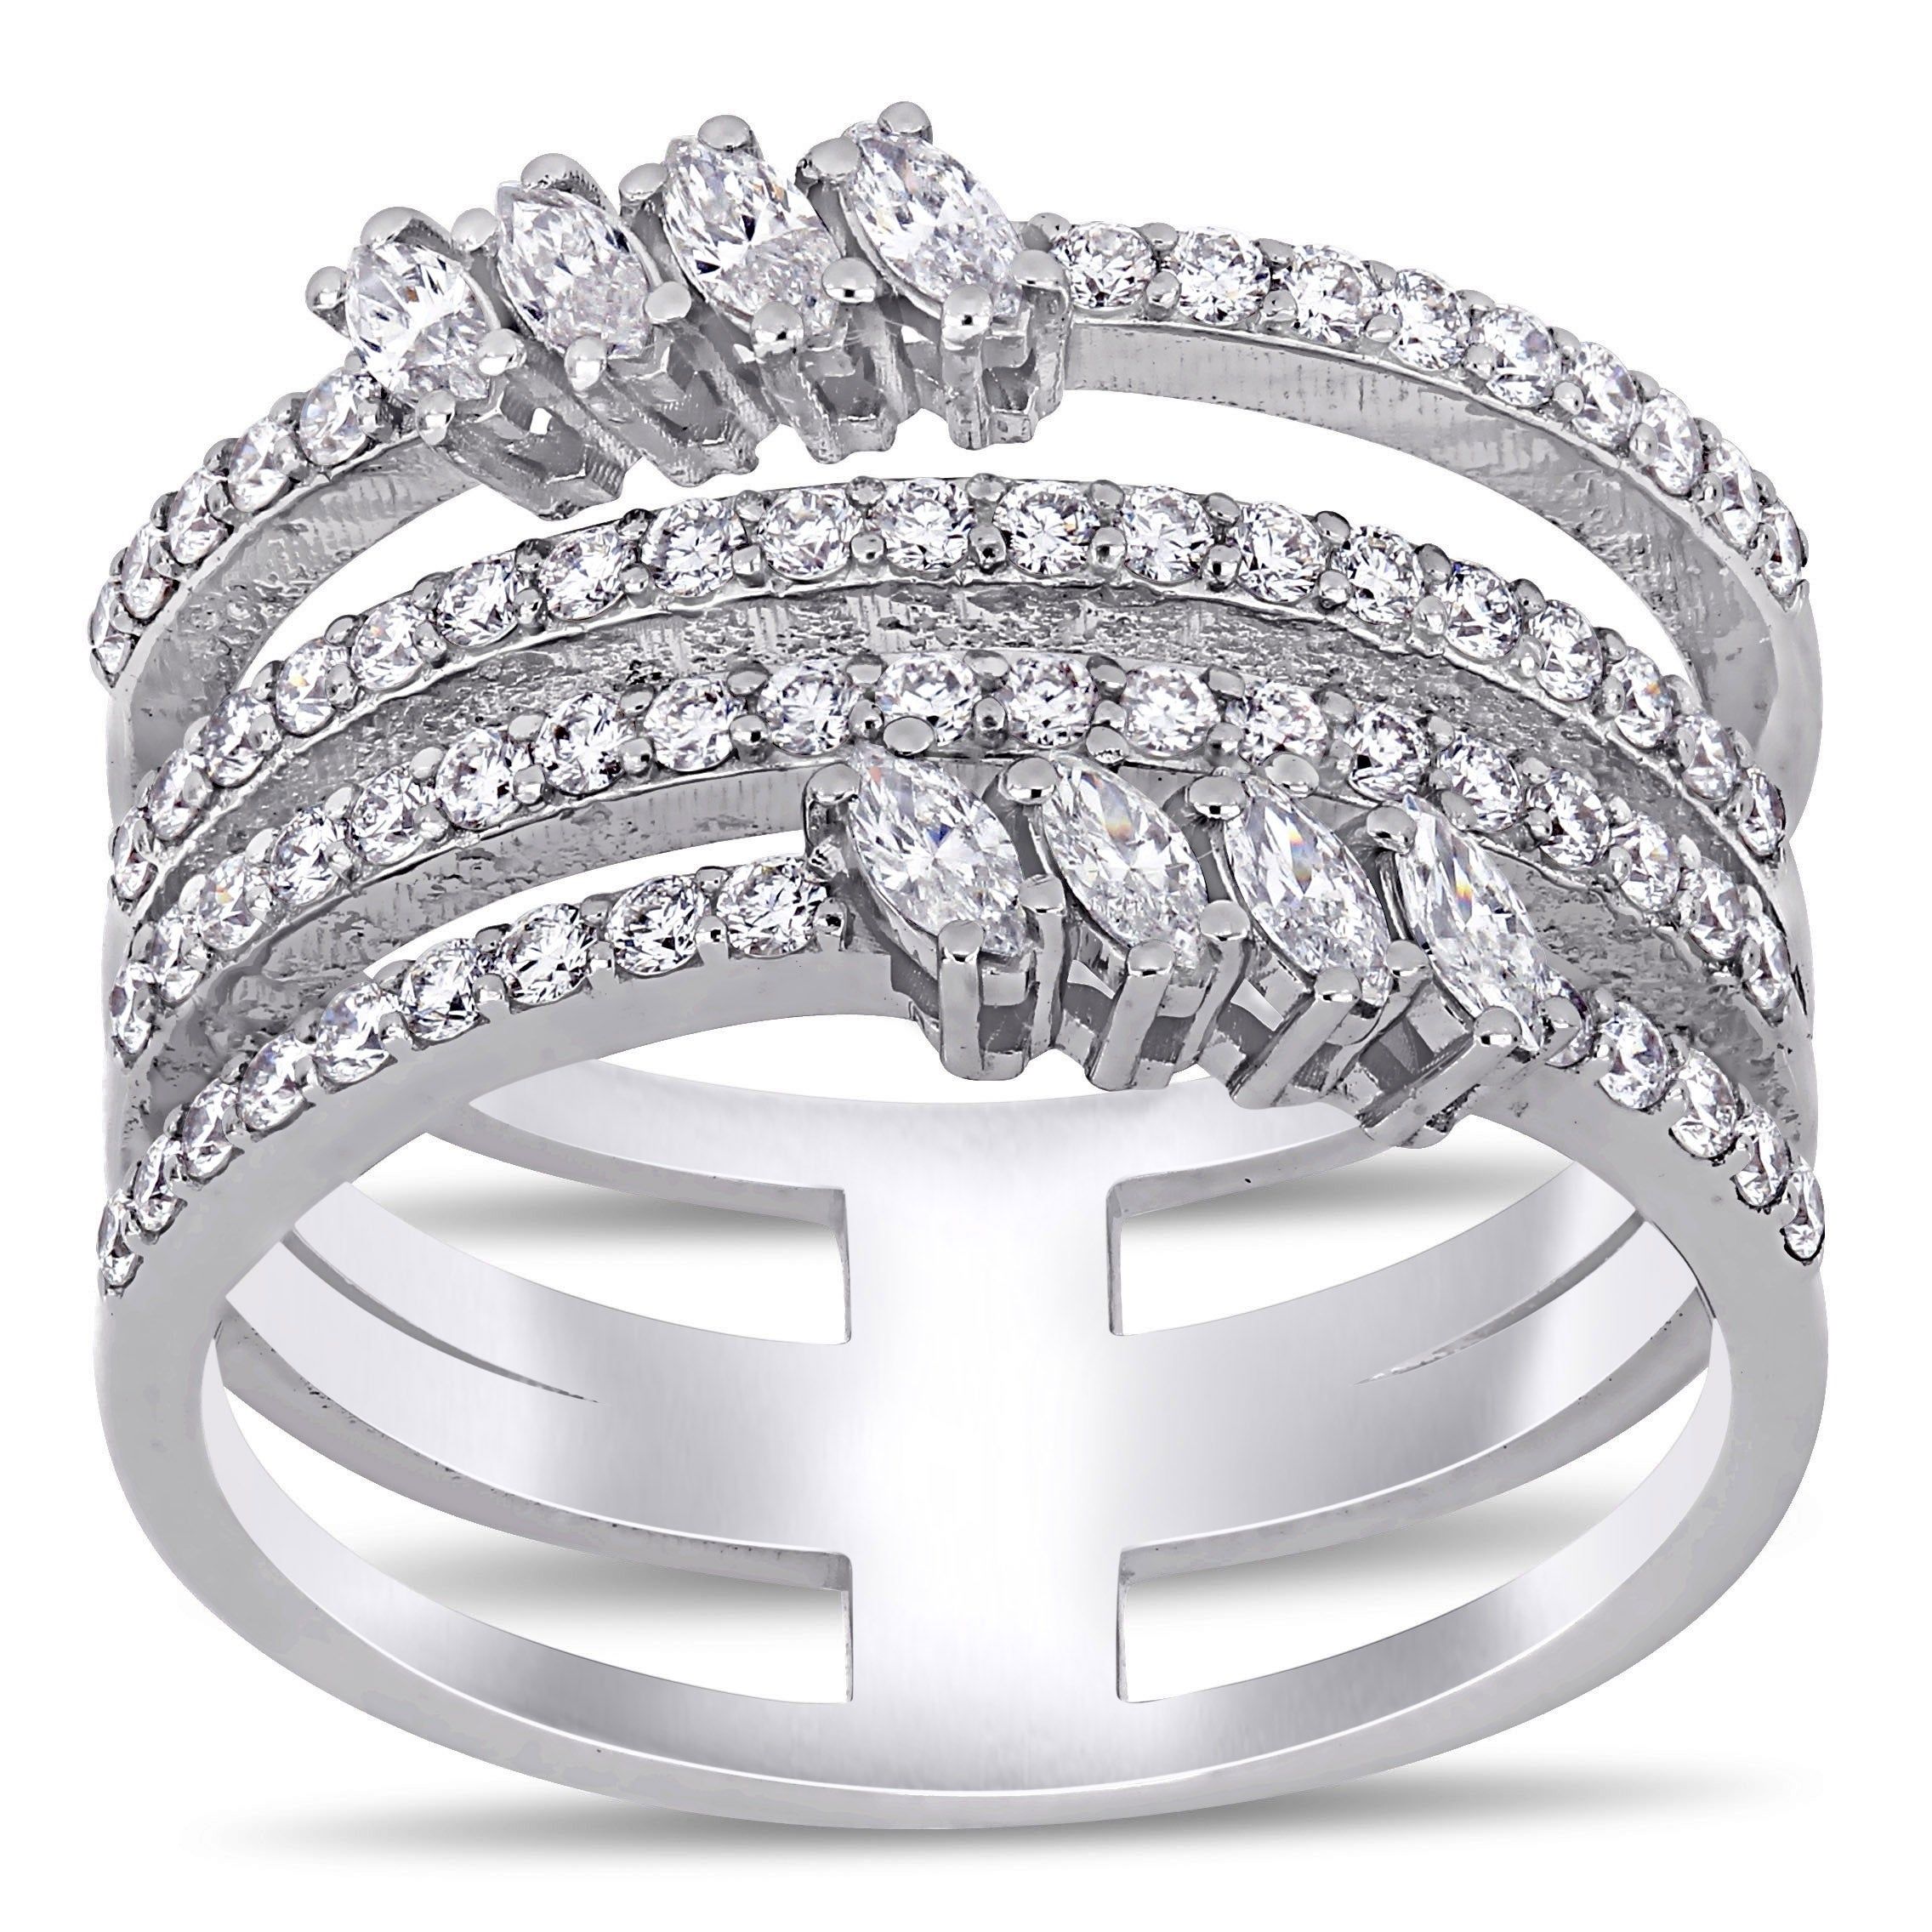 Miadora 14k White Gold 3/4ct Tdw Round And Marquise Cut Diamond Multi Row  Anniversary Band Ring For 2019 Diamond Multi Row Anniversary Bands In White Gold (View 17 of 25)